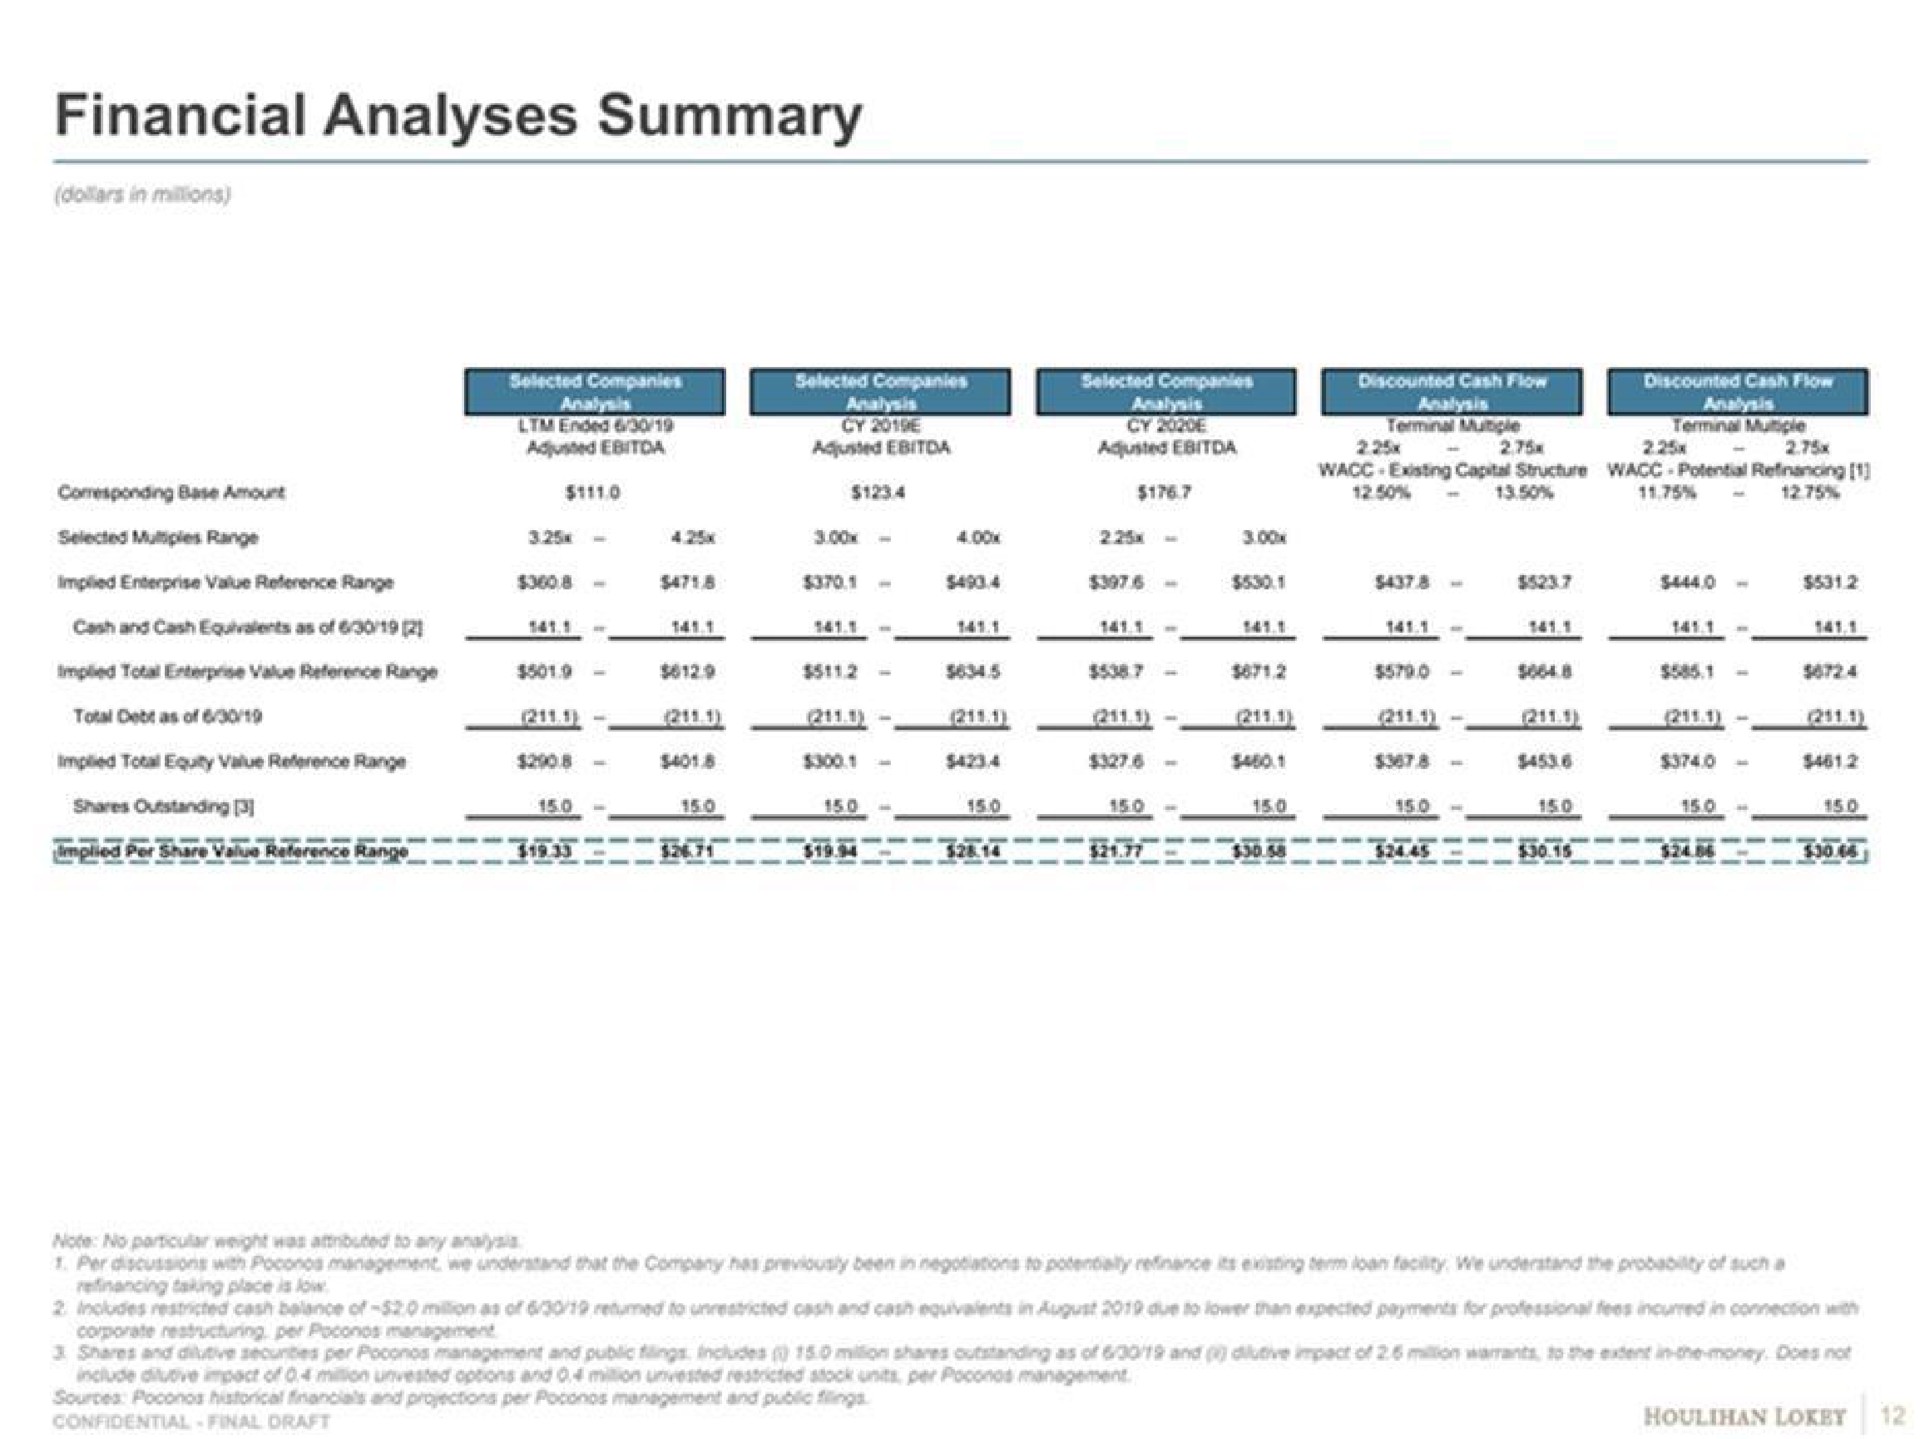 financial analyses summary replied share vales reference range a | Goldman Sachs